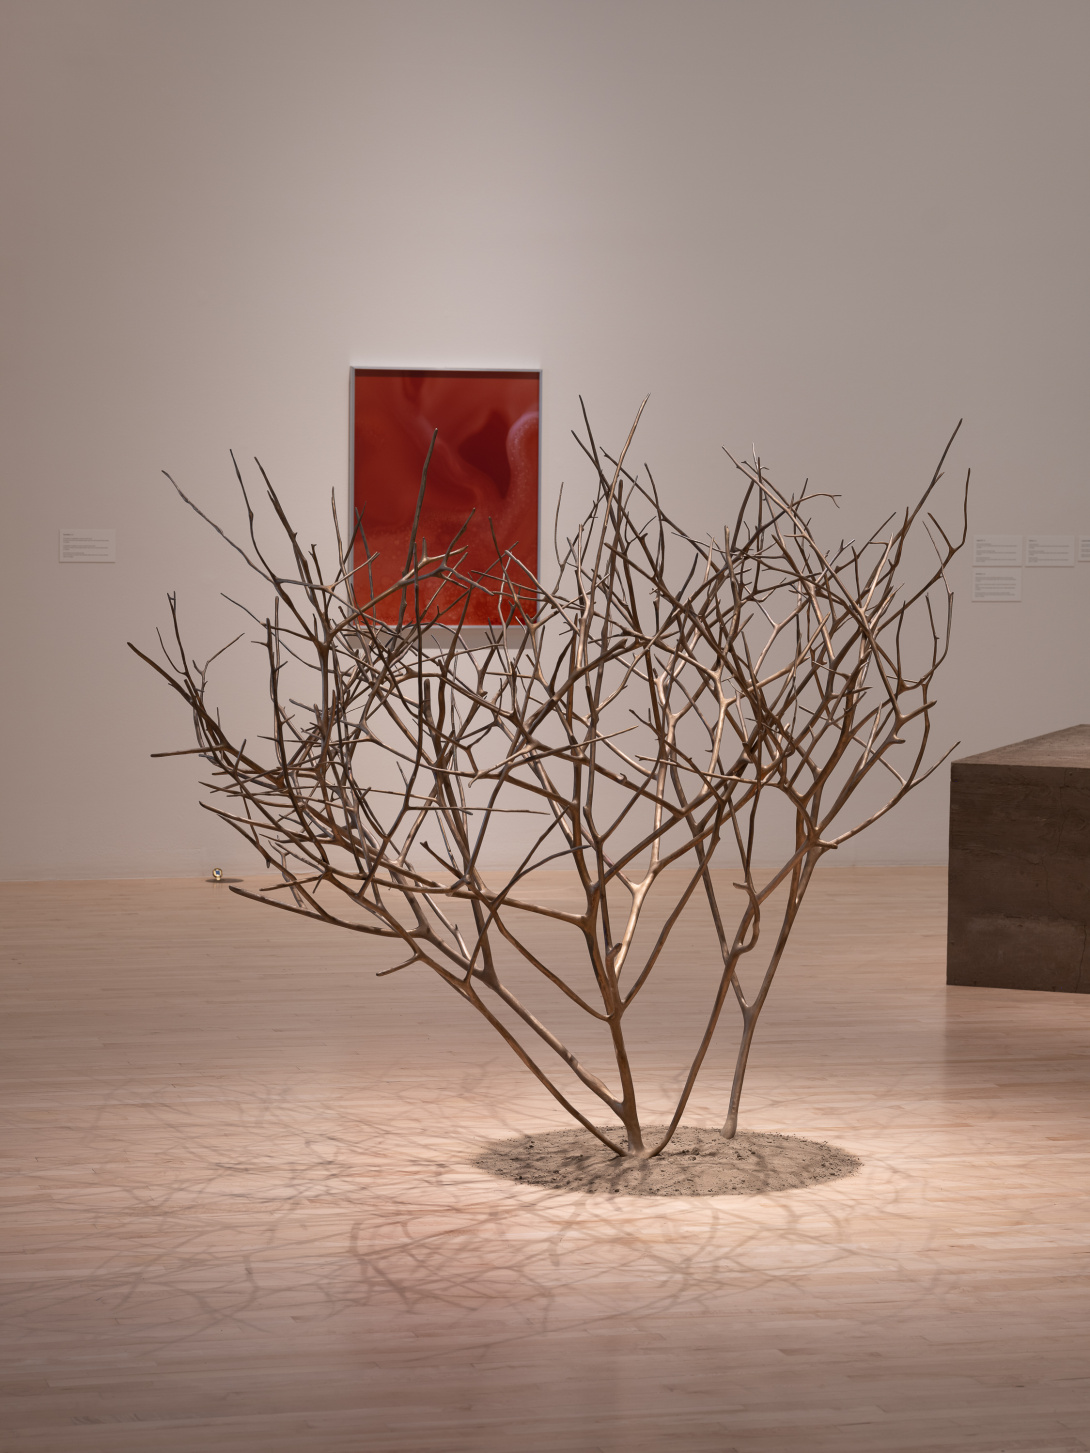 A large tree-like sculpture stands tall, seemingly growing from the ground. It is surrounded by light and in the background is a red painting.